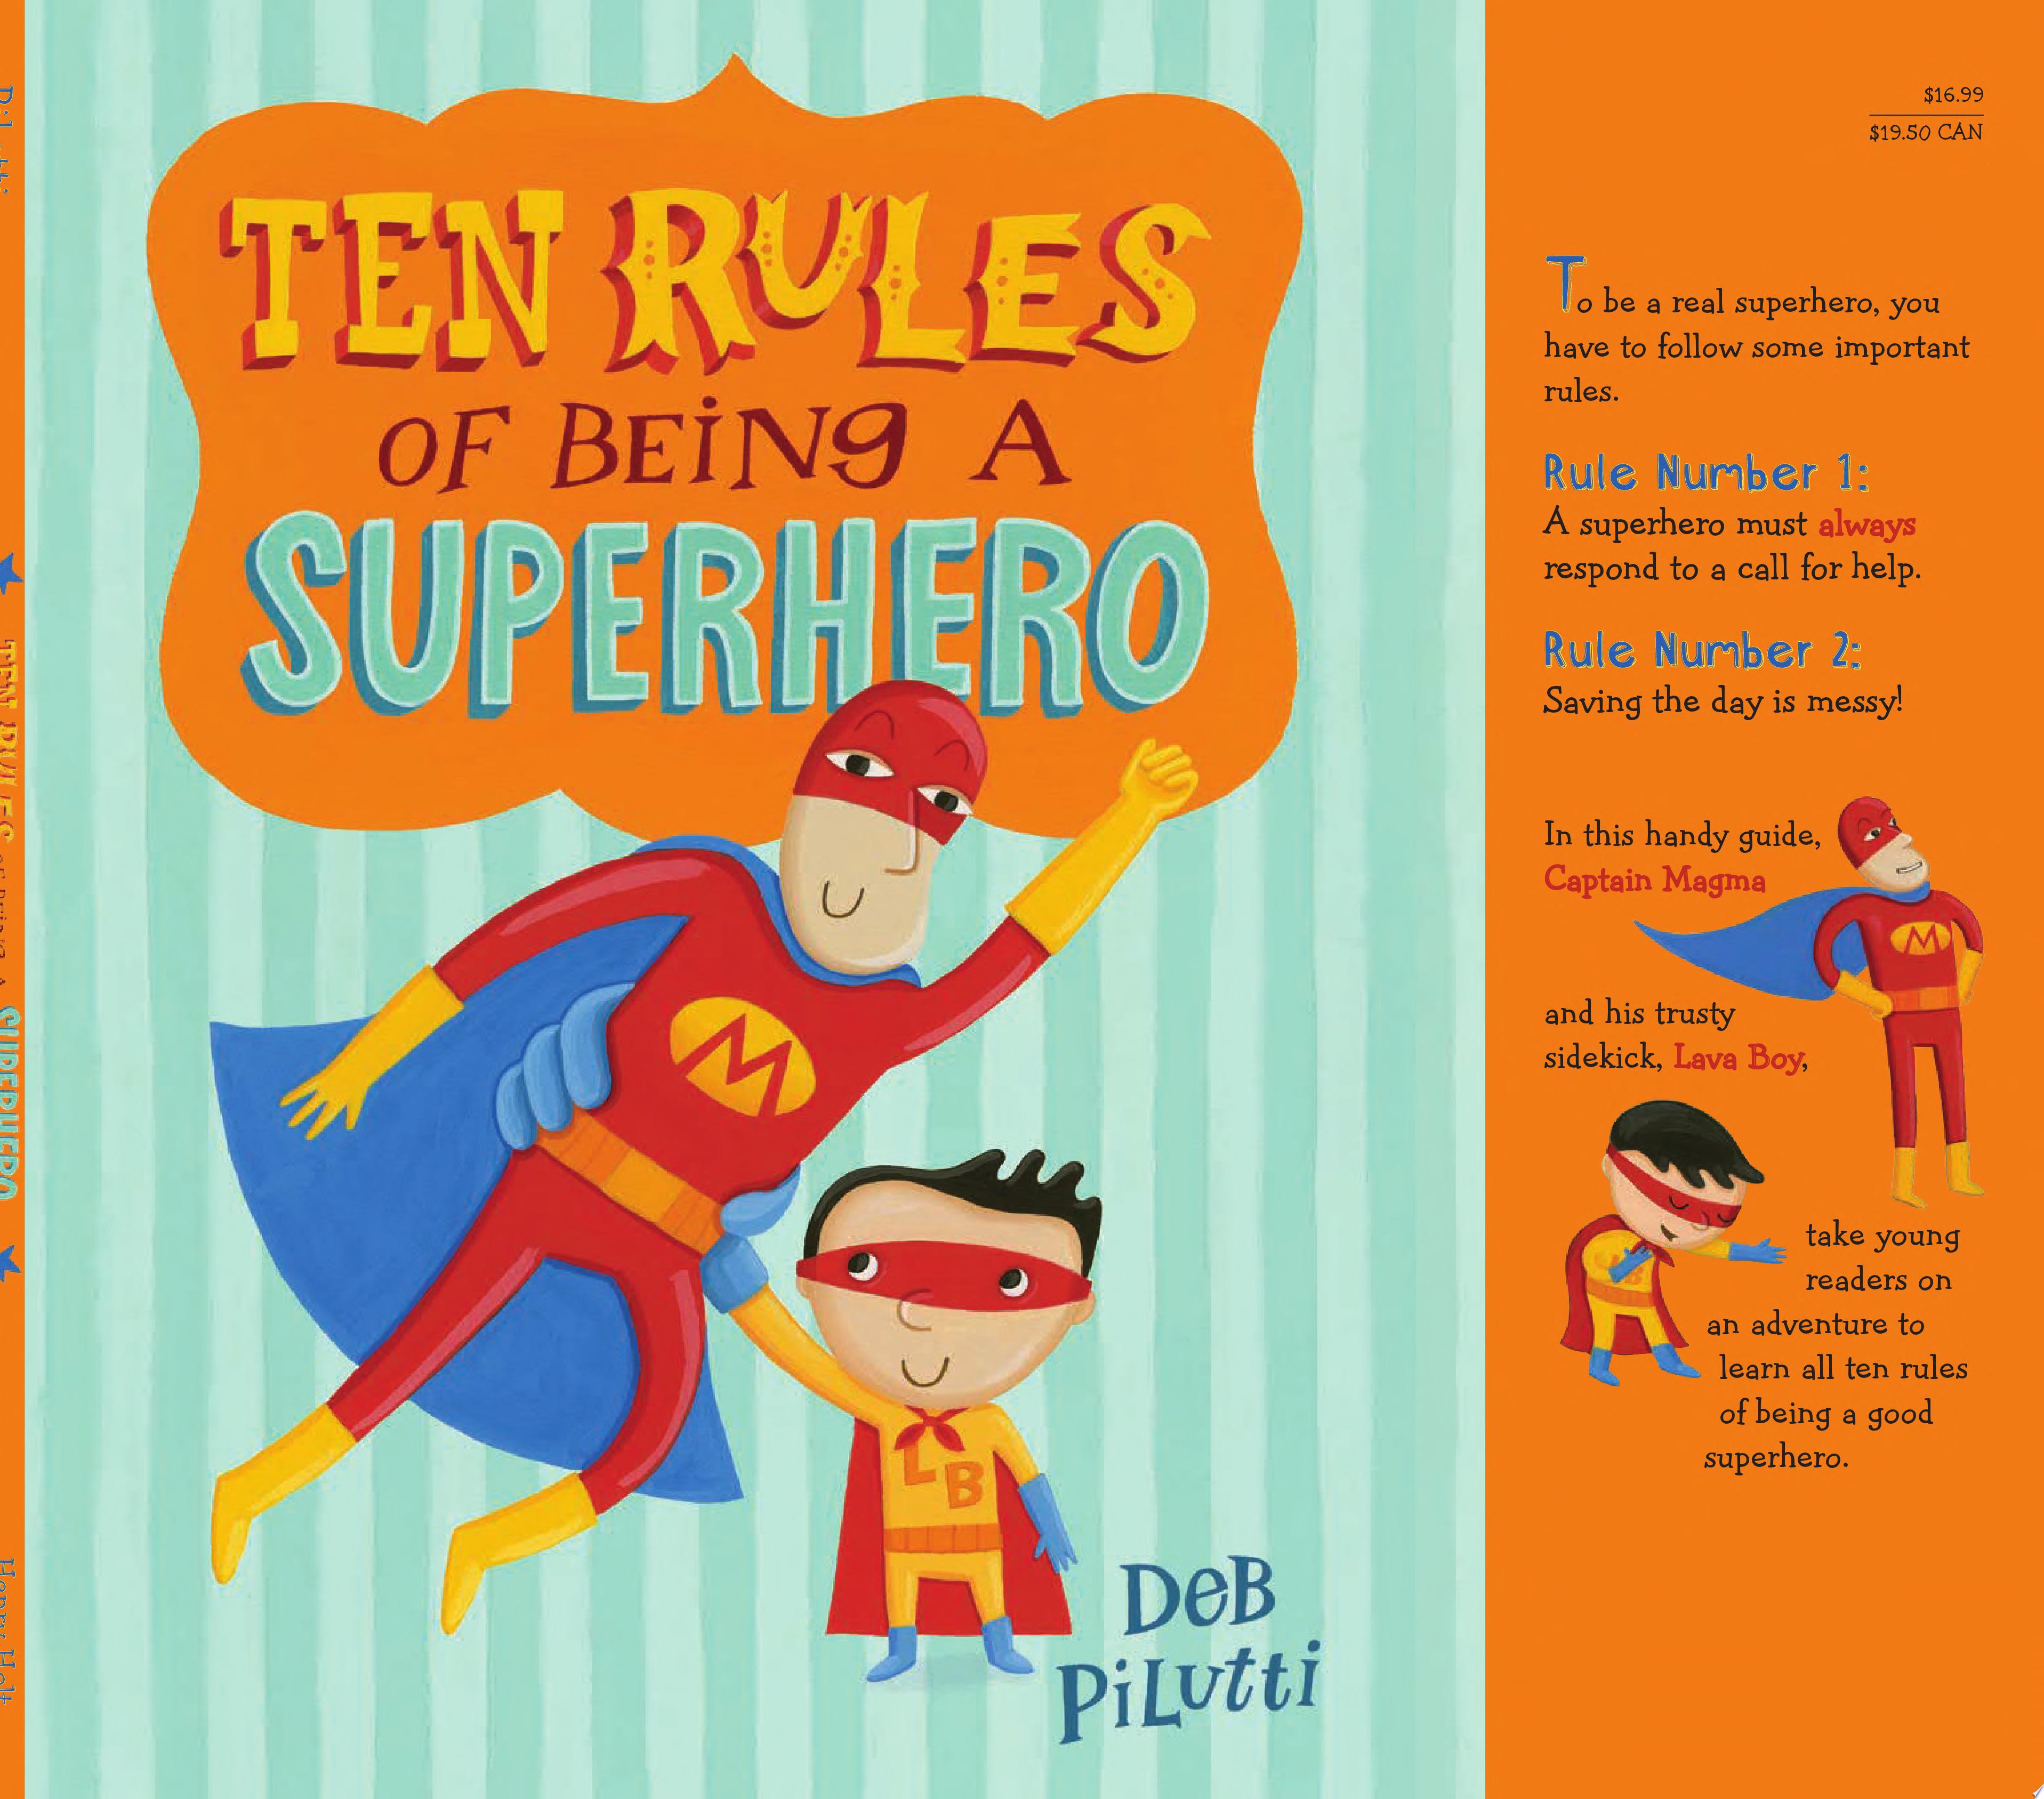 Image for "Ten Rules of Being a Superhero"